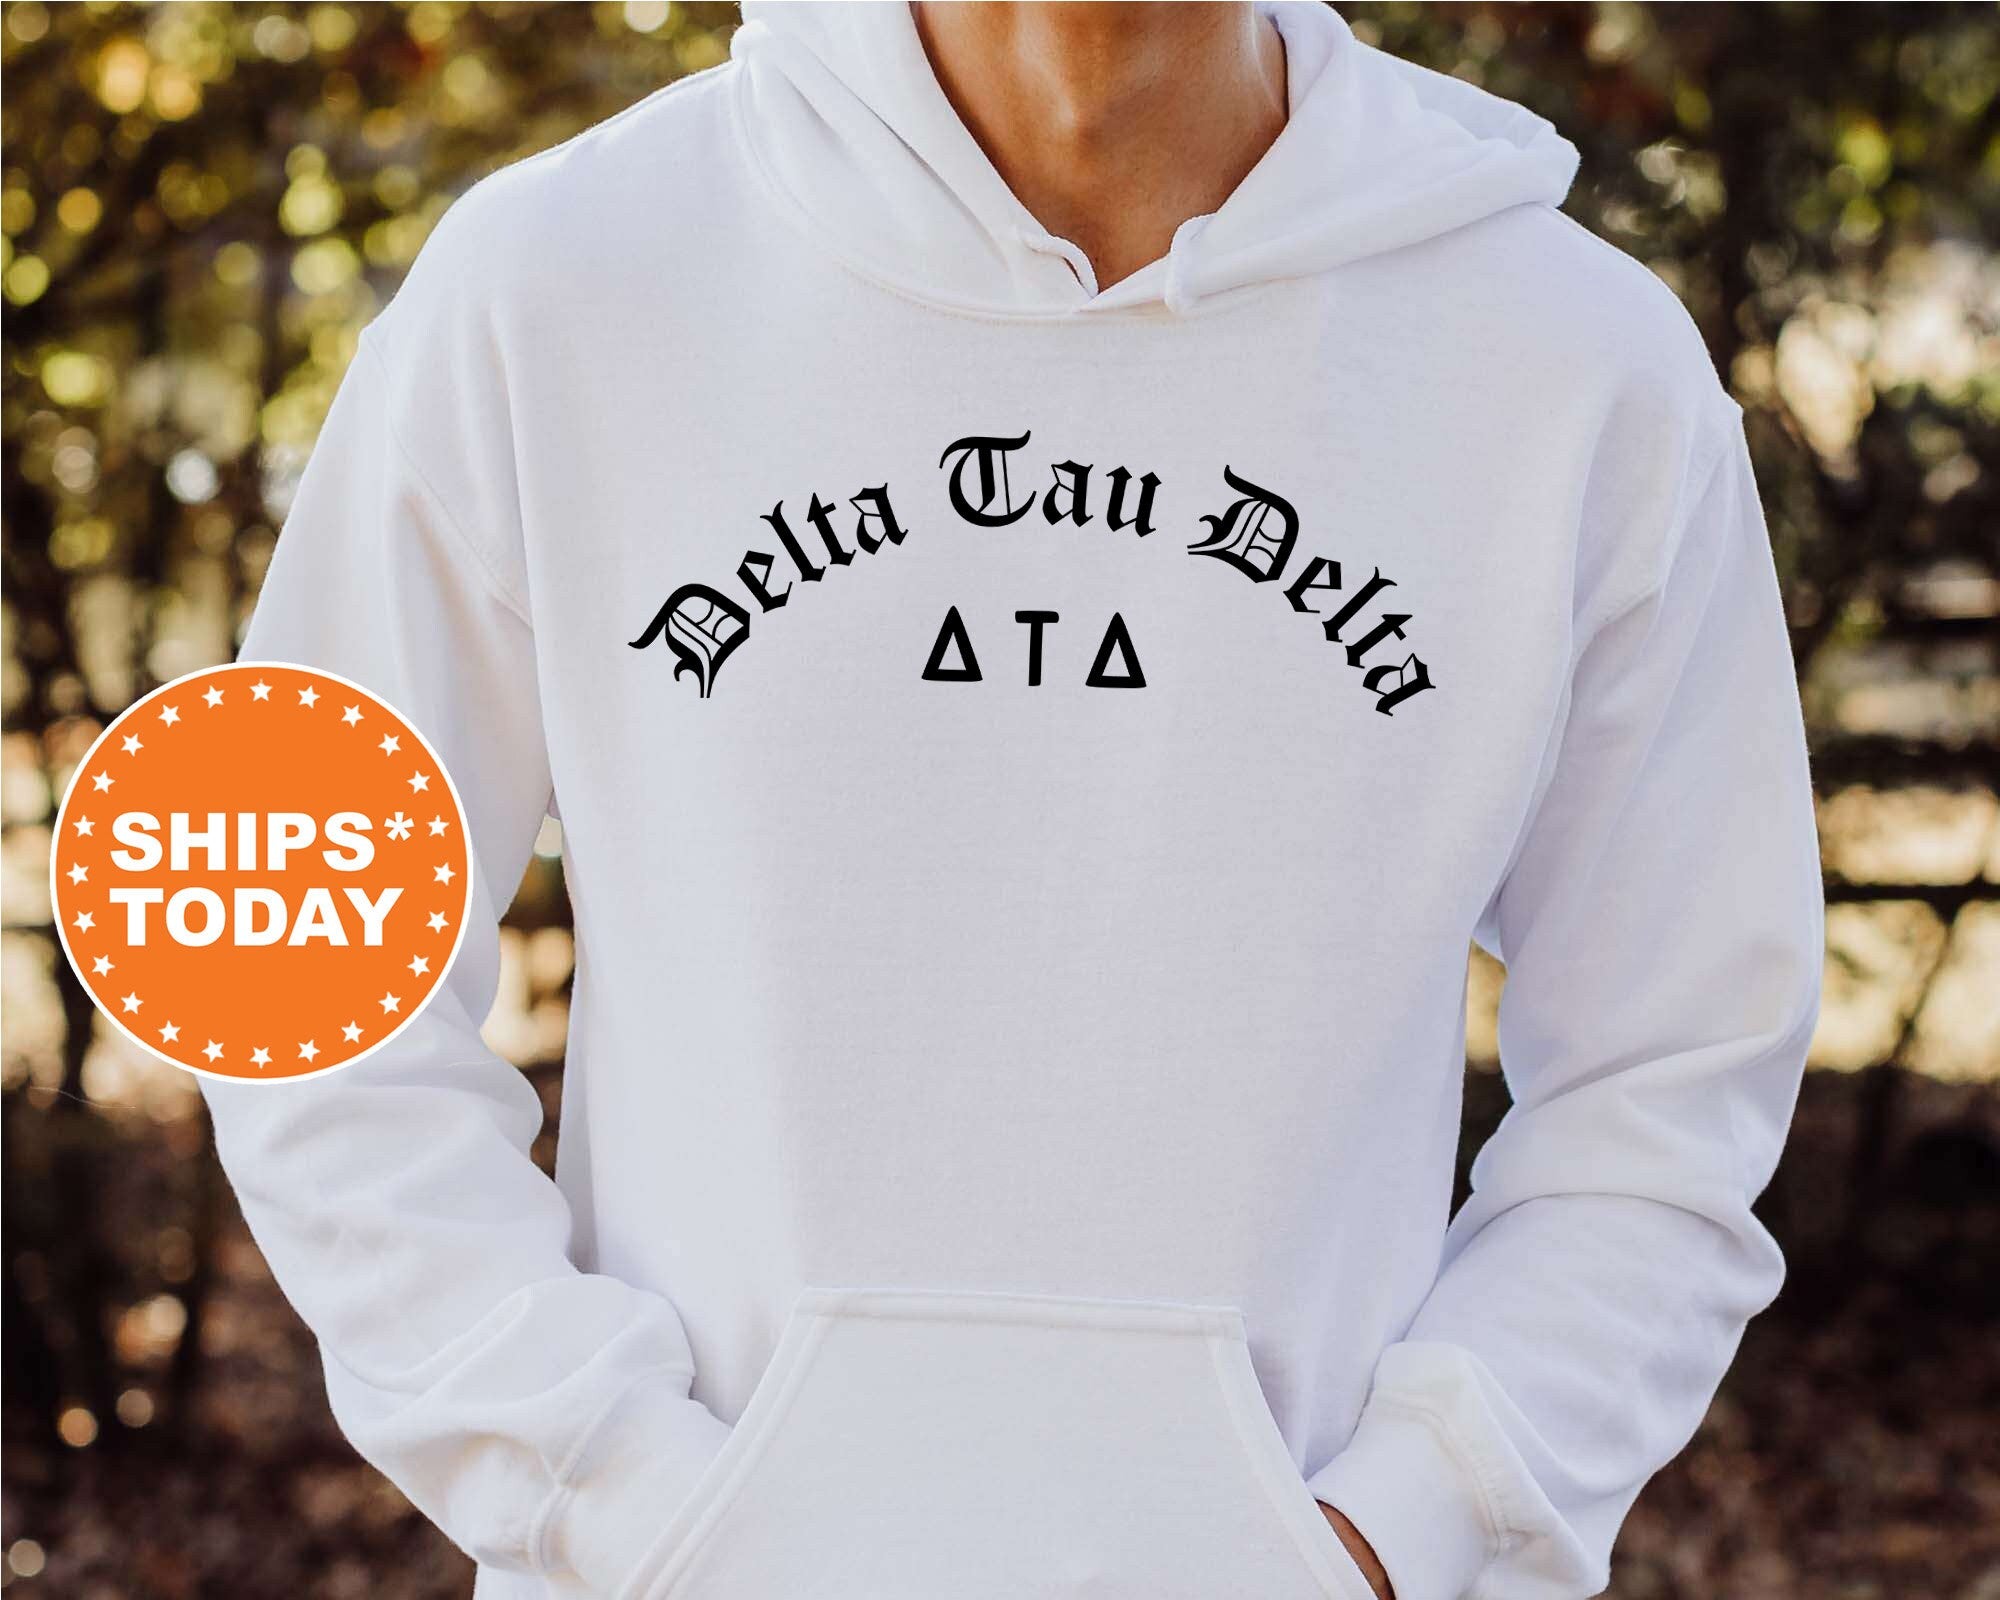 Delta Tau Delta Collection - SHIPS TODAY - Kite and Crest